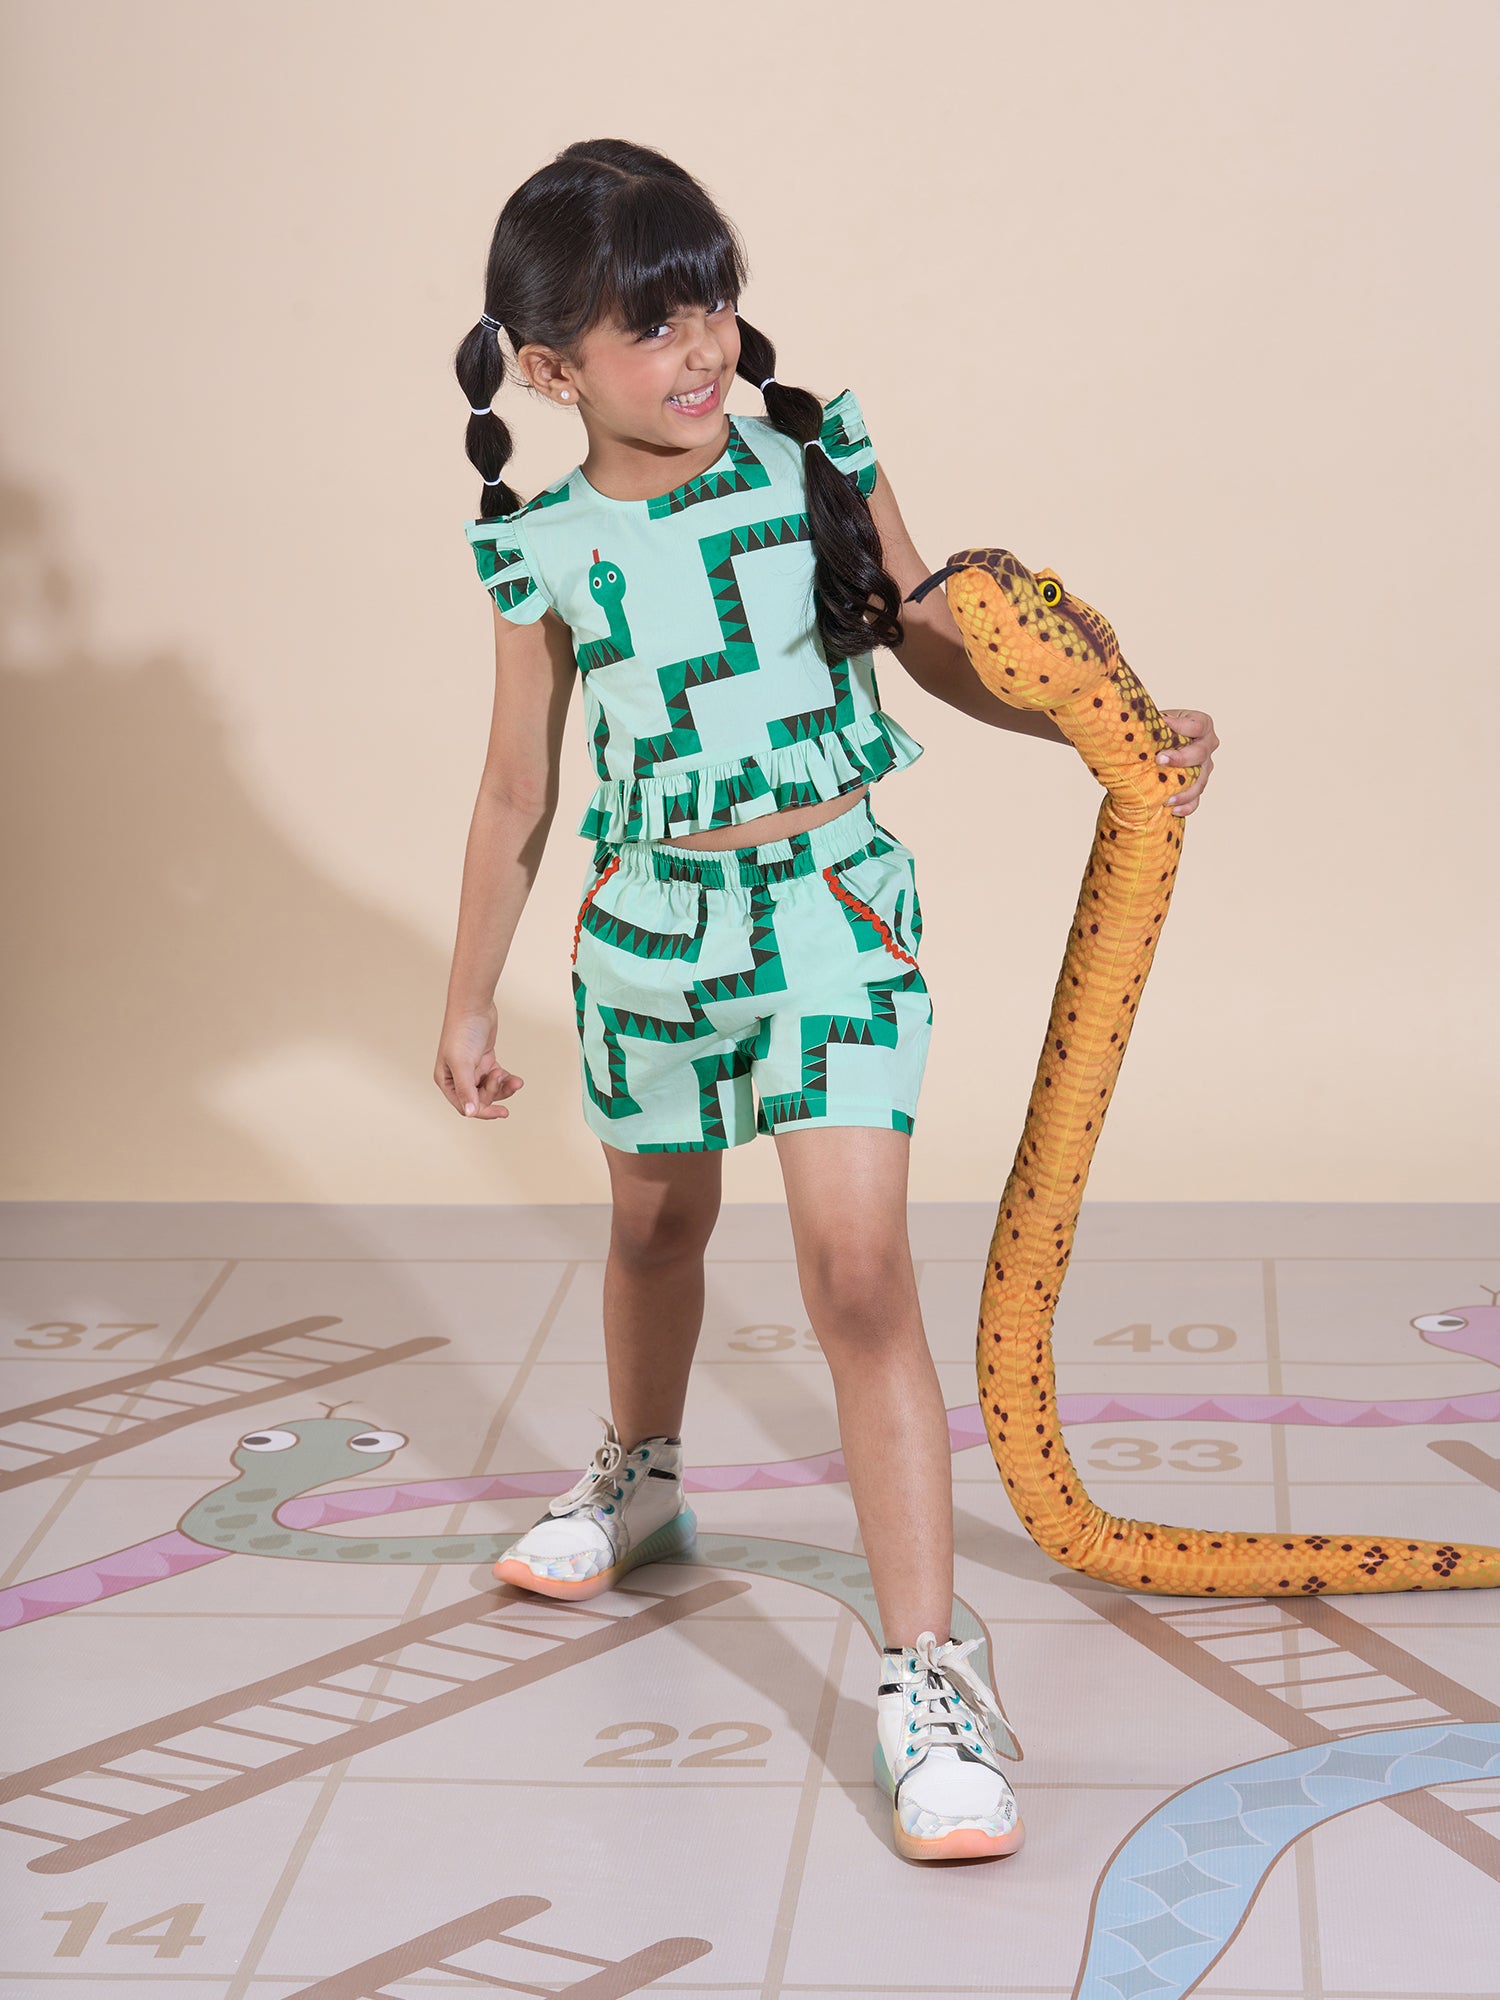 Snakes And Ladders Girls Green Table Print Top And Shorts Sets From Siblings Collection - Lil Drama